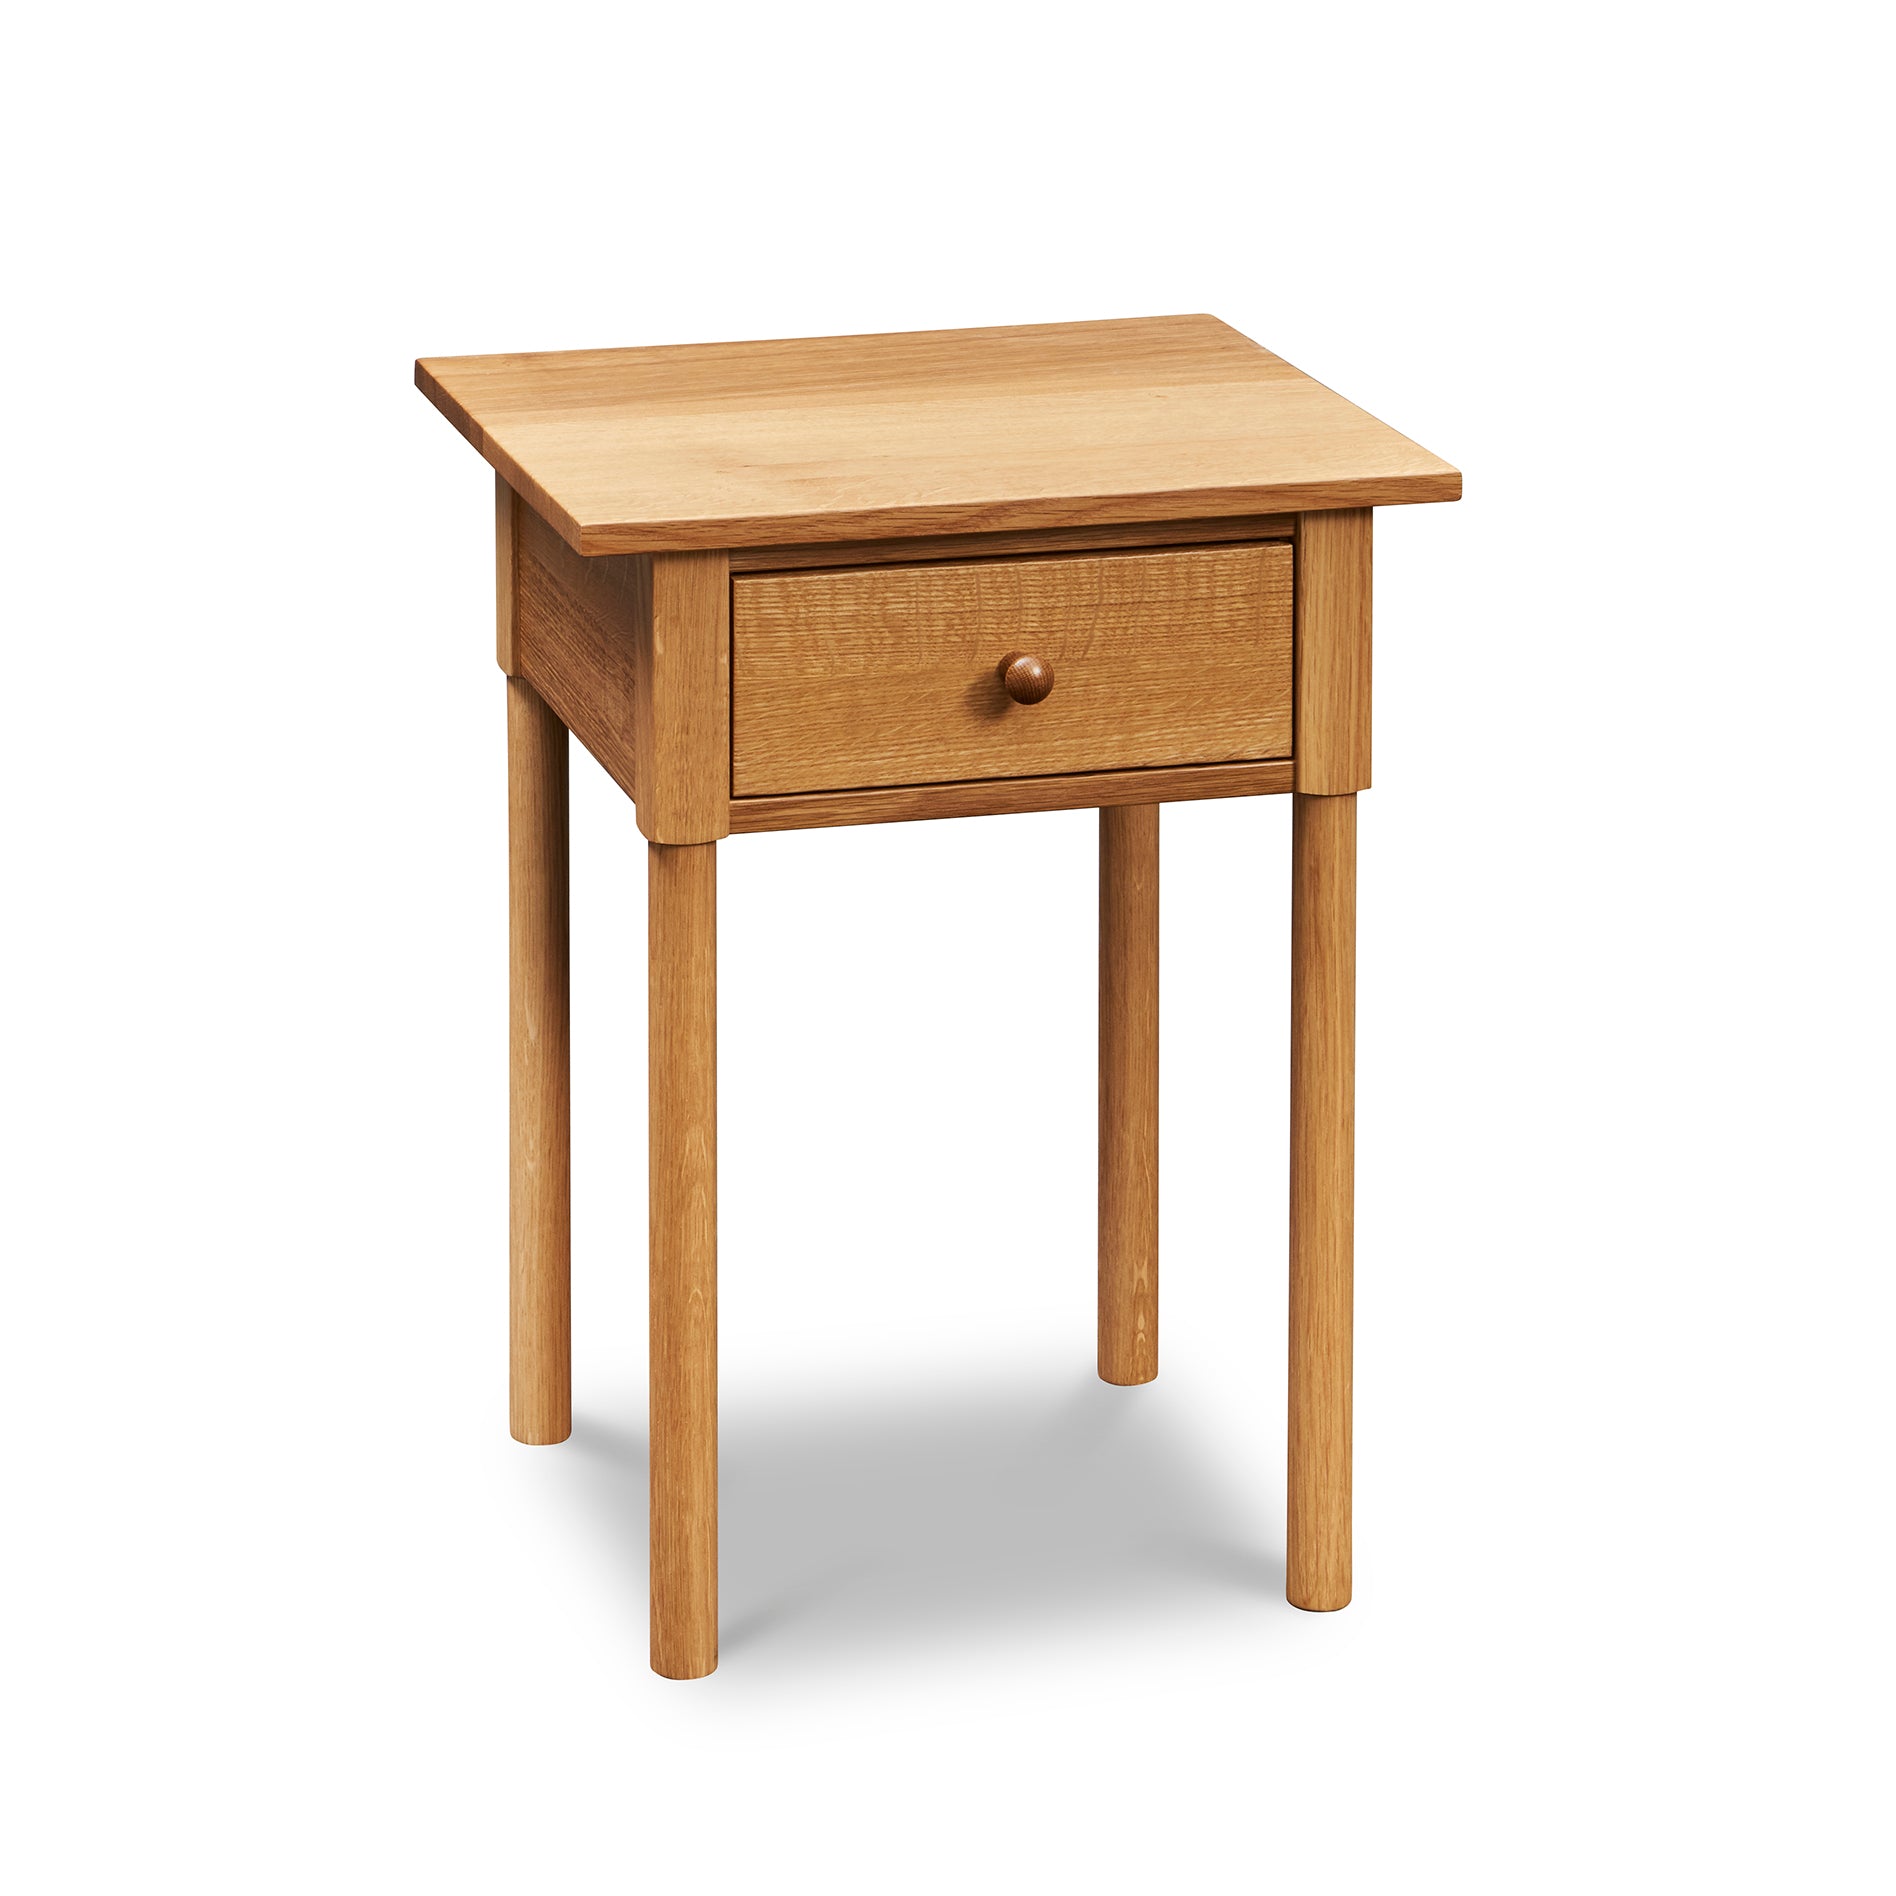 Modern interpretation of a classic Shaker style nightstand with one drawer and rounded legs, in solid white oak wood